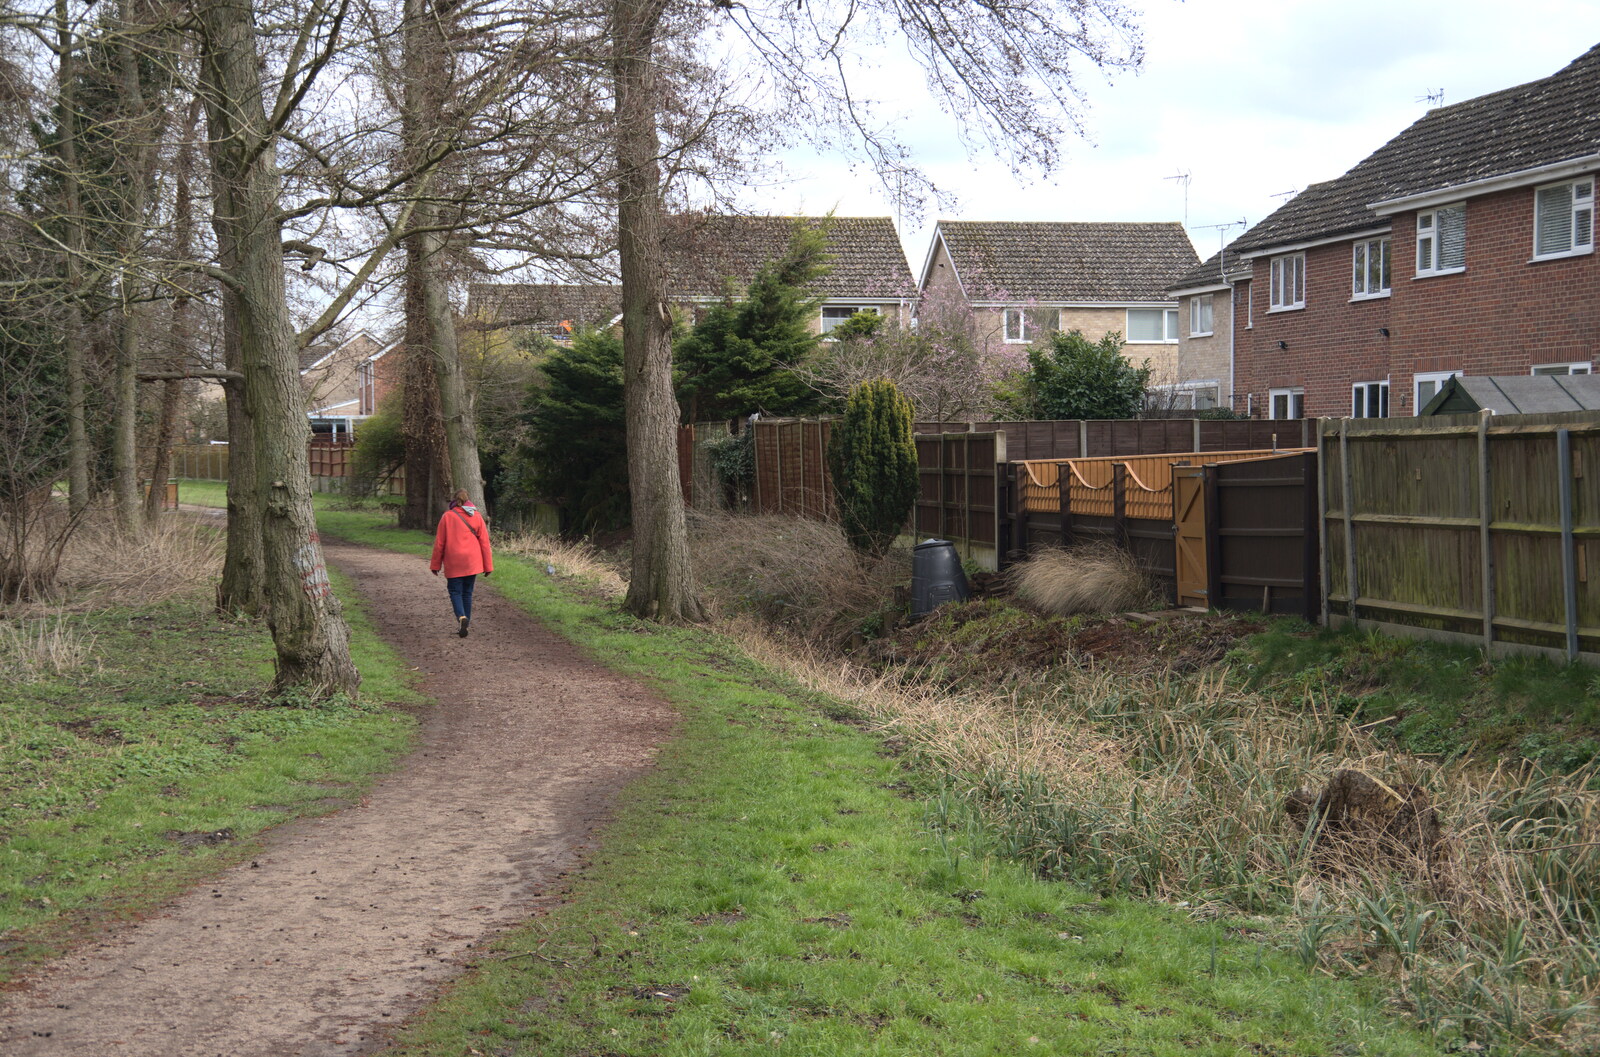 We walk back past a housing estate from A Postcard from Thetford, Norfolk - 15th March 2023